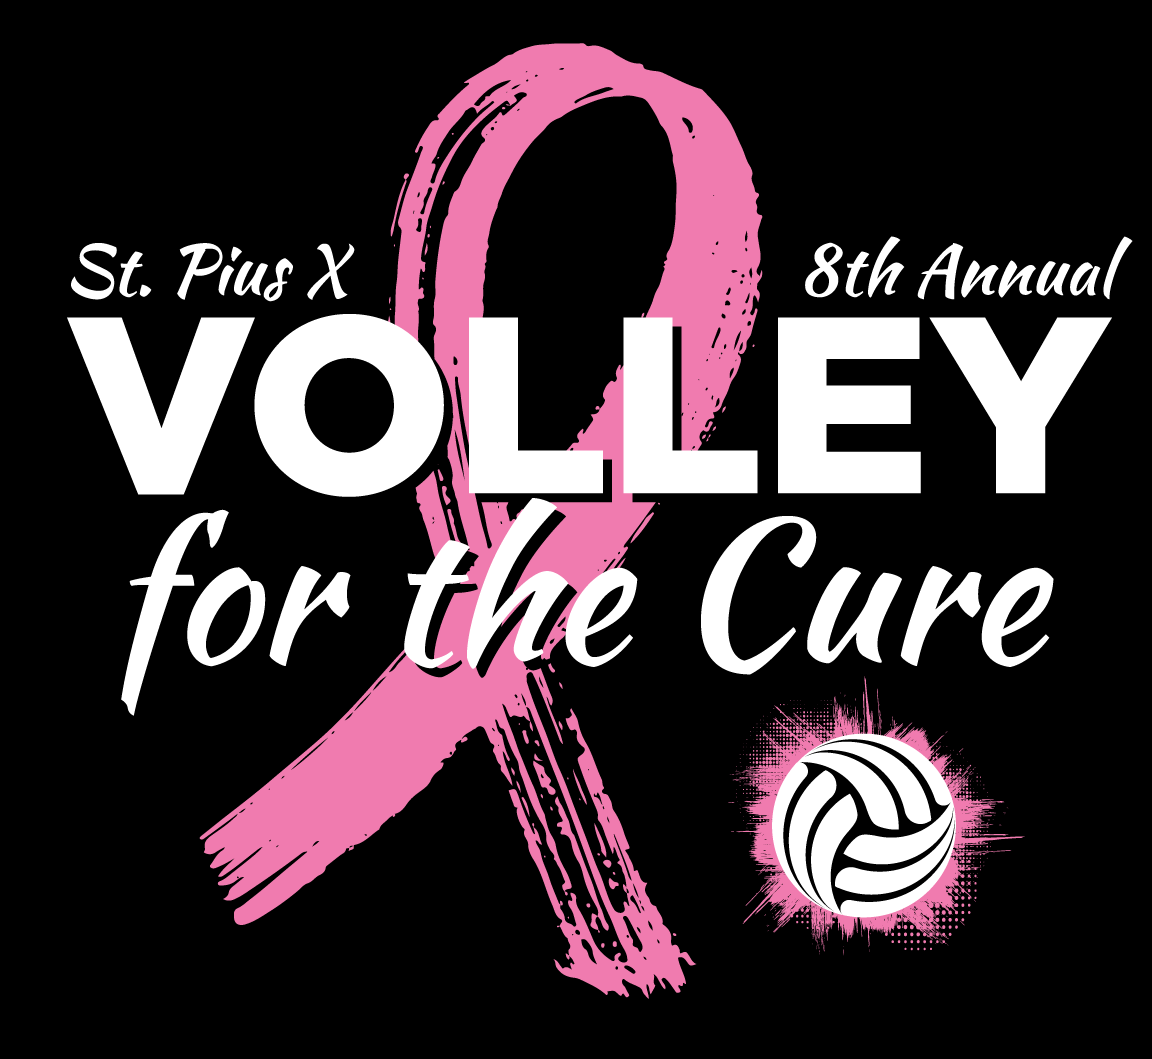 St. Pius X Volley For The Cure